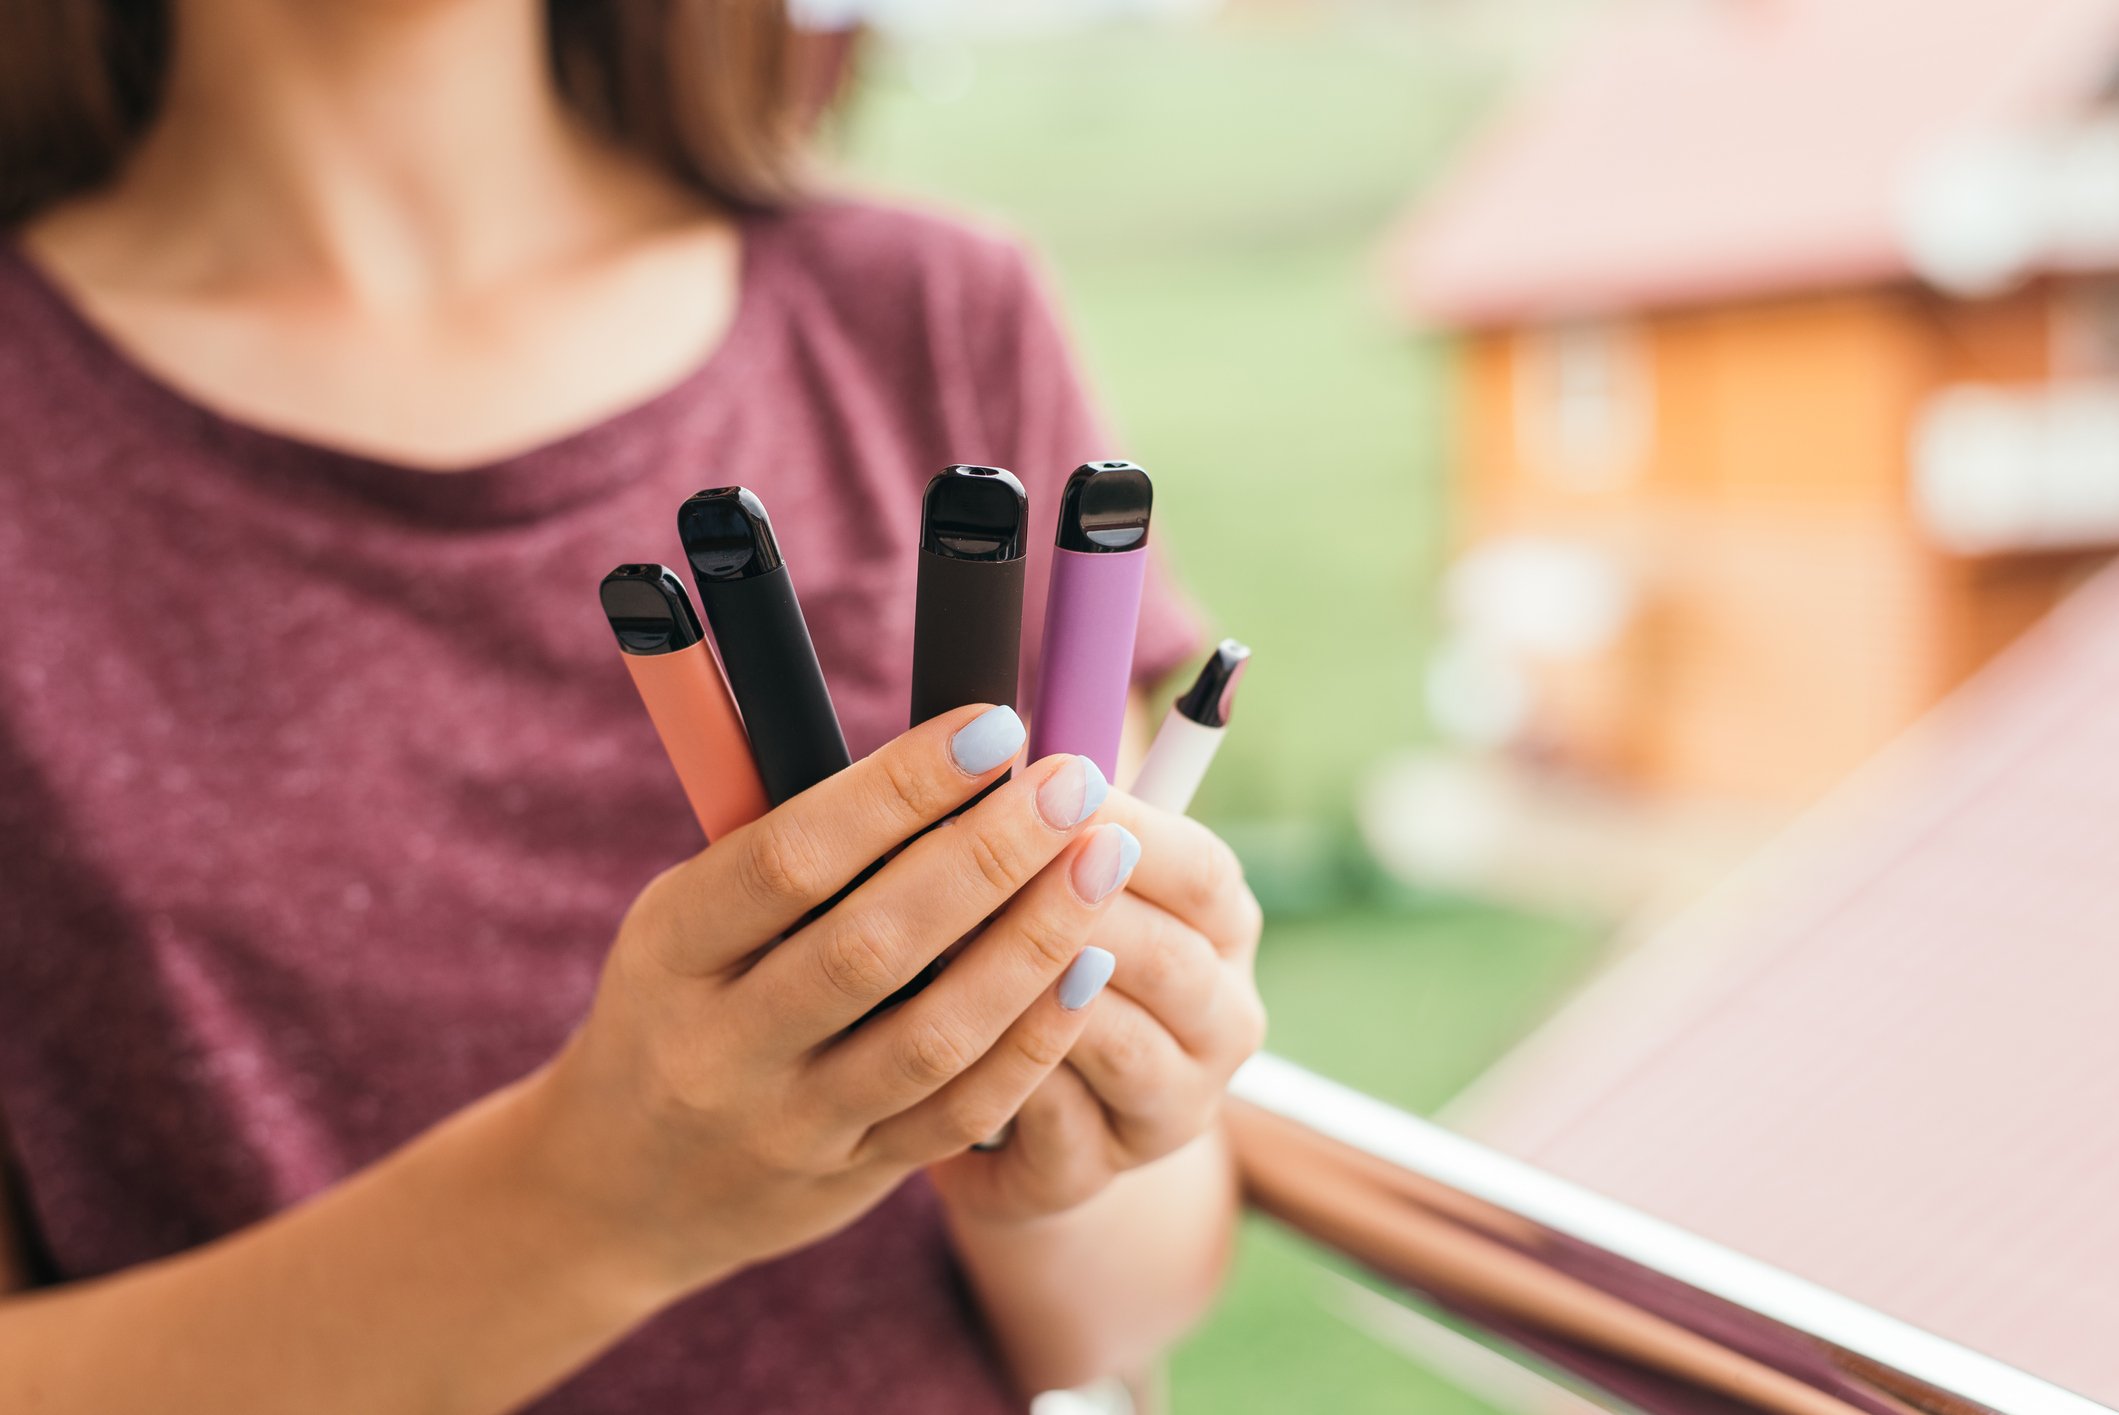 The pros and cons of using disposable CBD vapes compared to other consumption methods